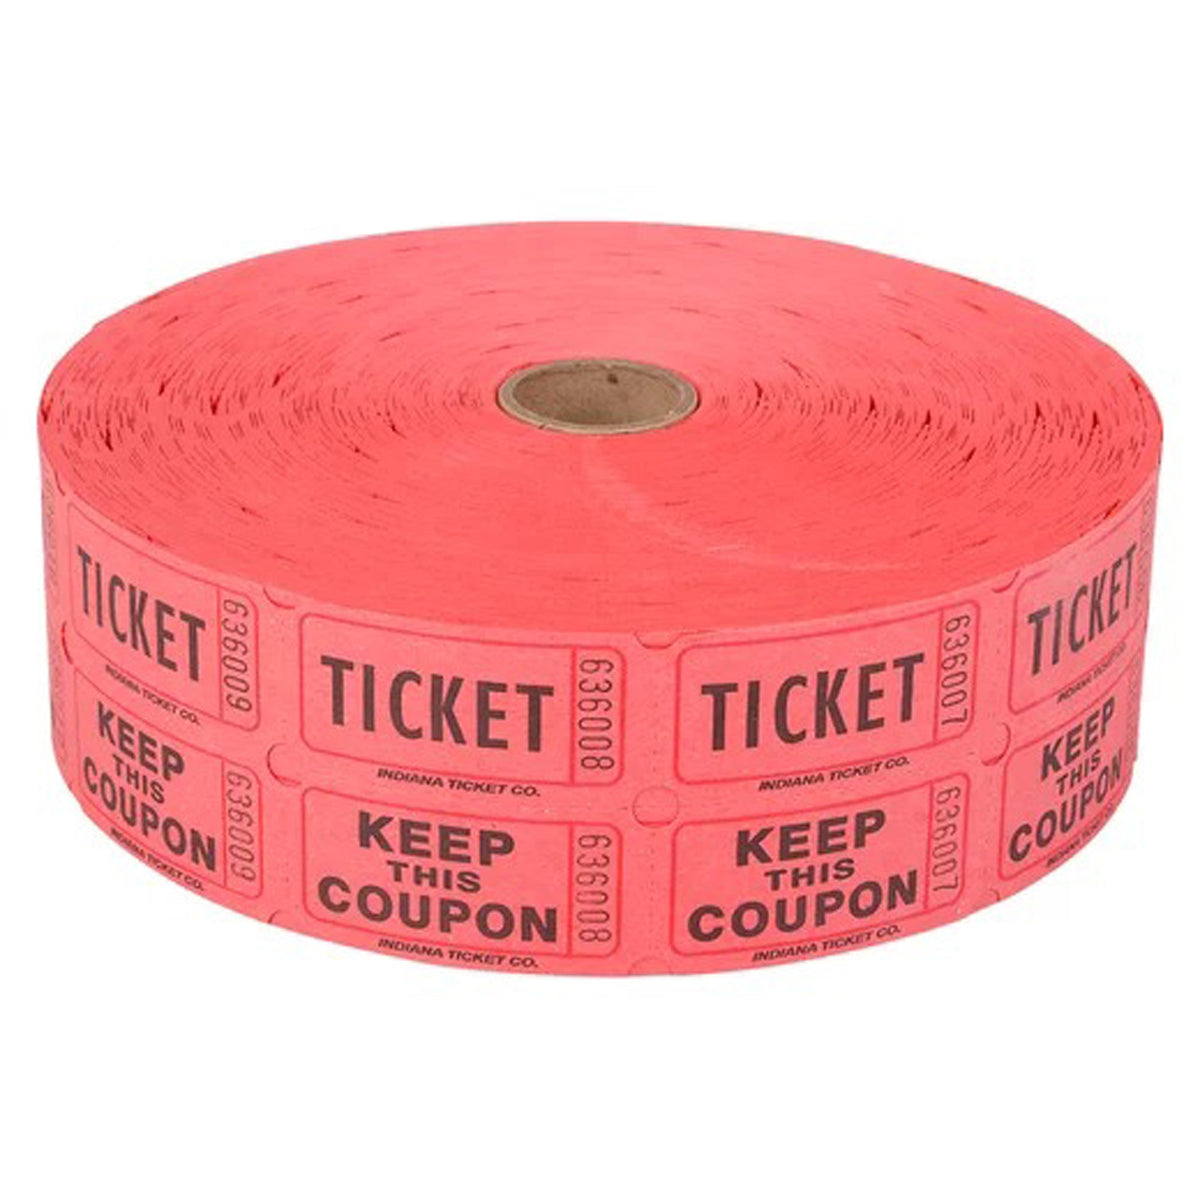 RHODE ISLAND NOVELTY Party Supplies Double Ticket Roll, Red, 2000 Count 097138887870